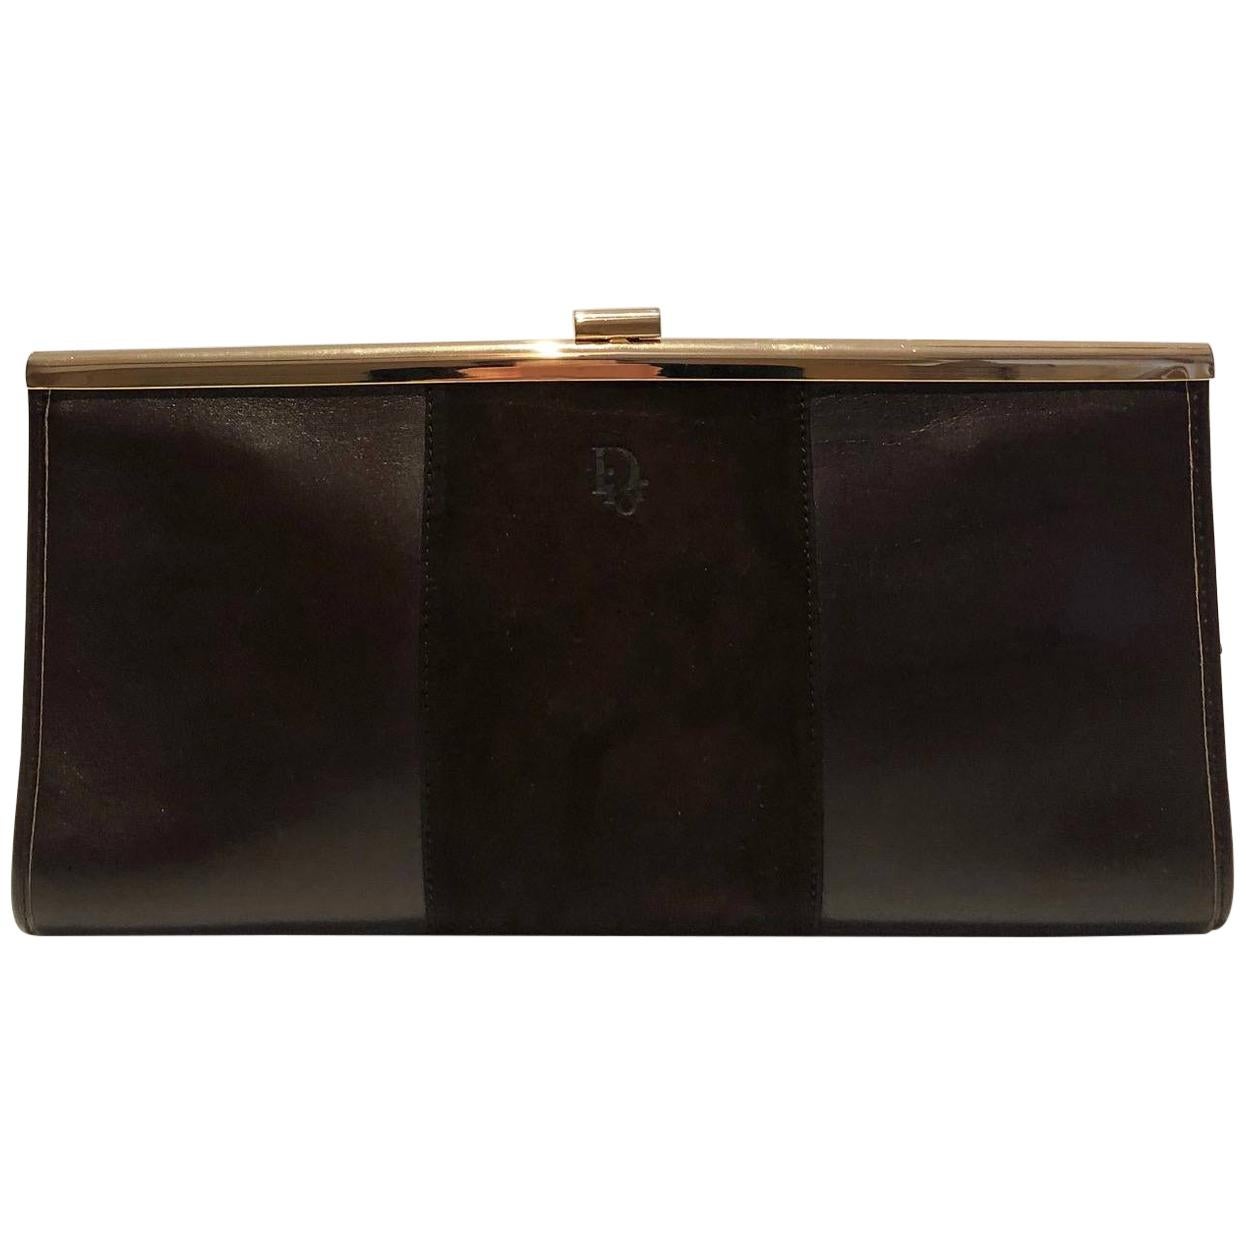 1970s Christian Dior Brown Leather Suede Clutch Bag 